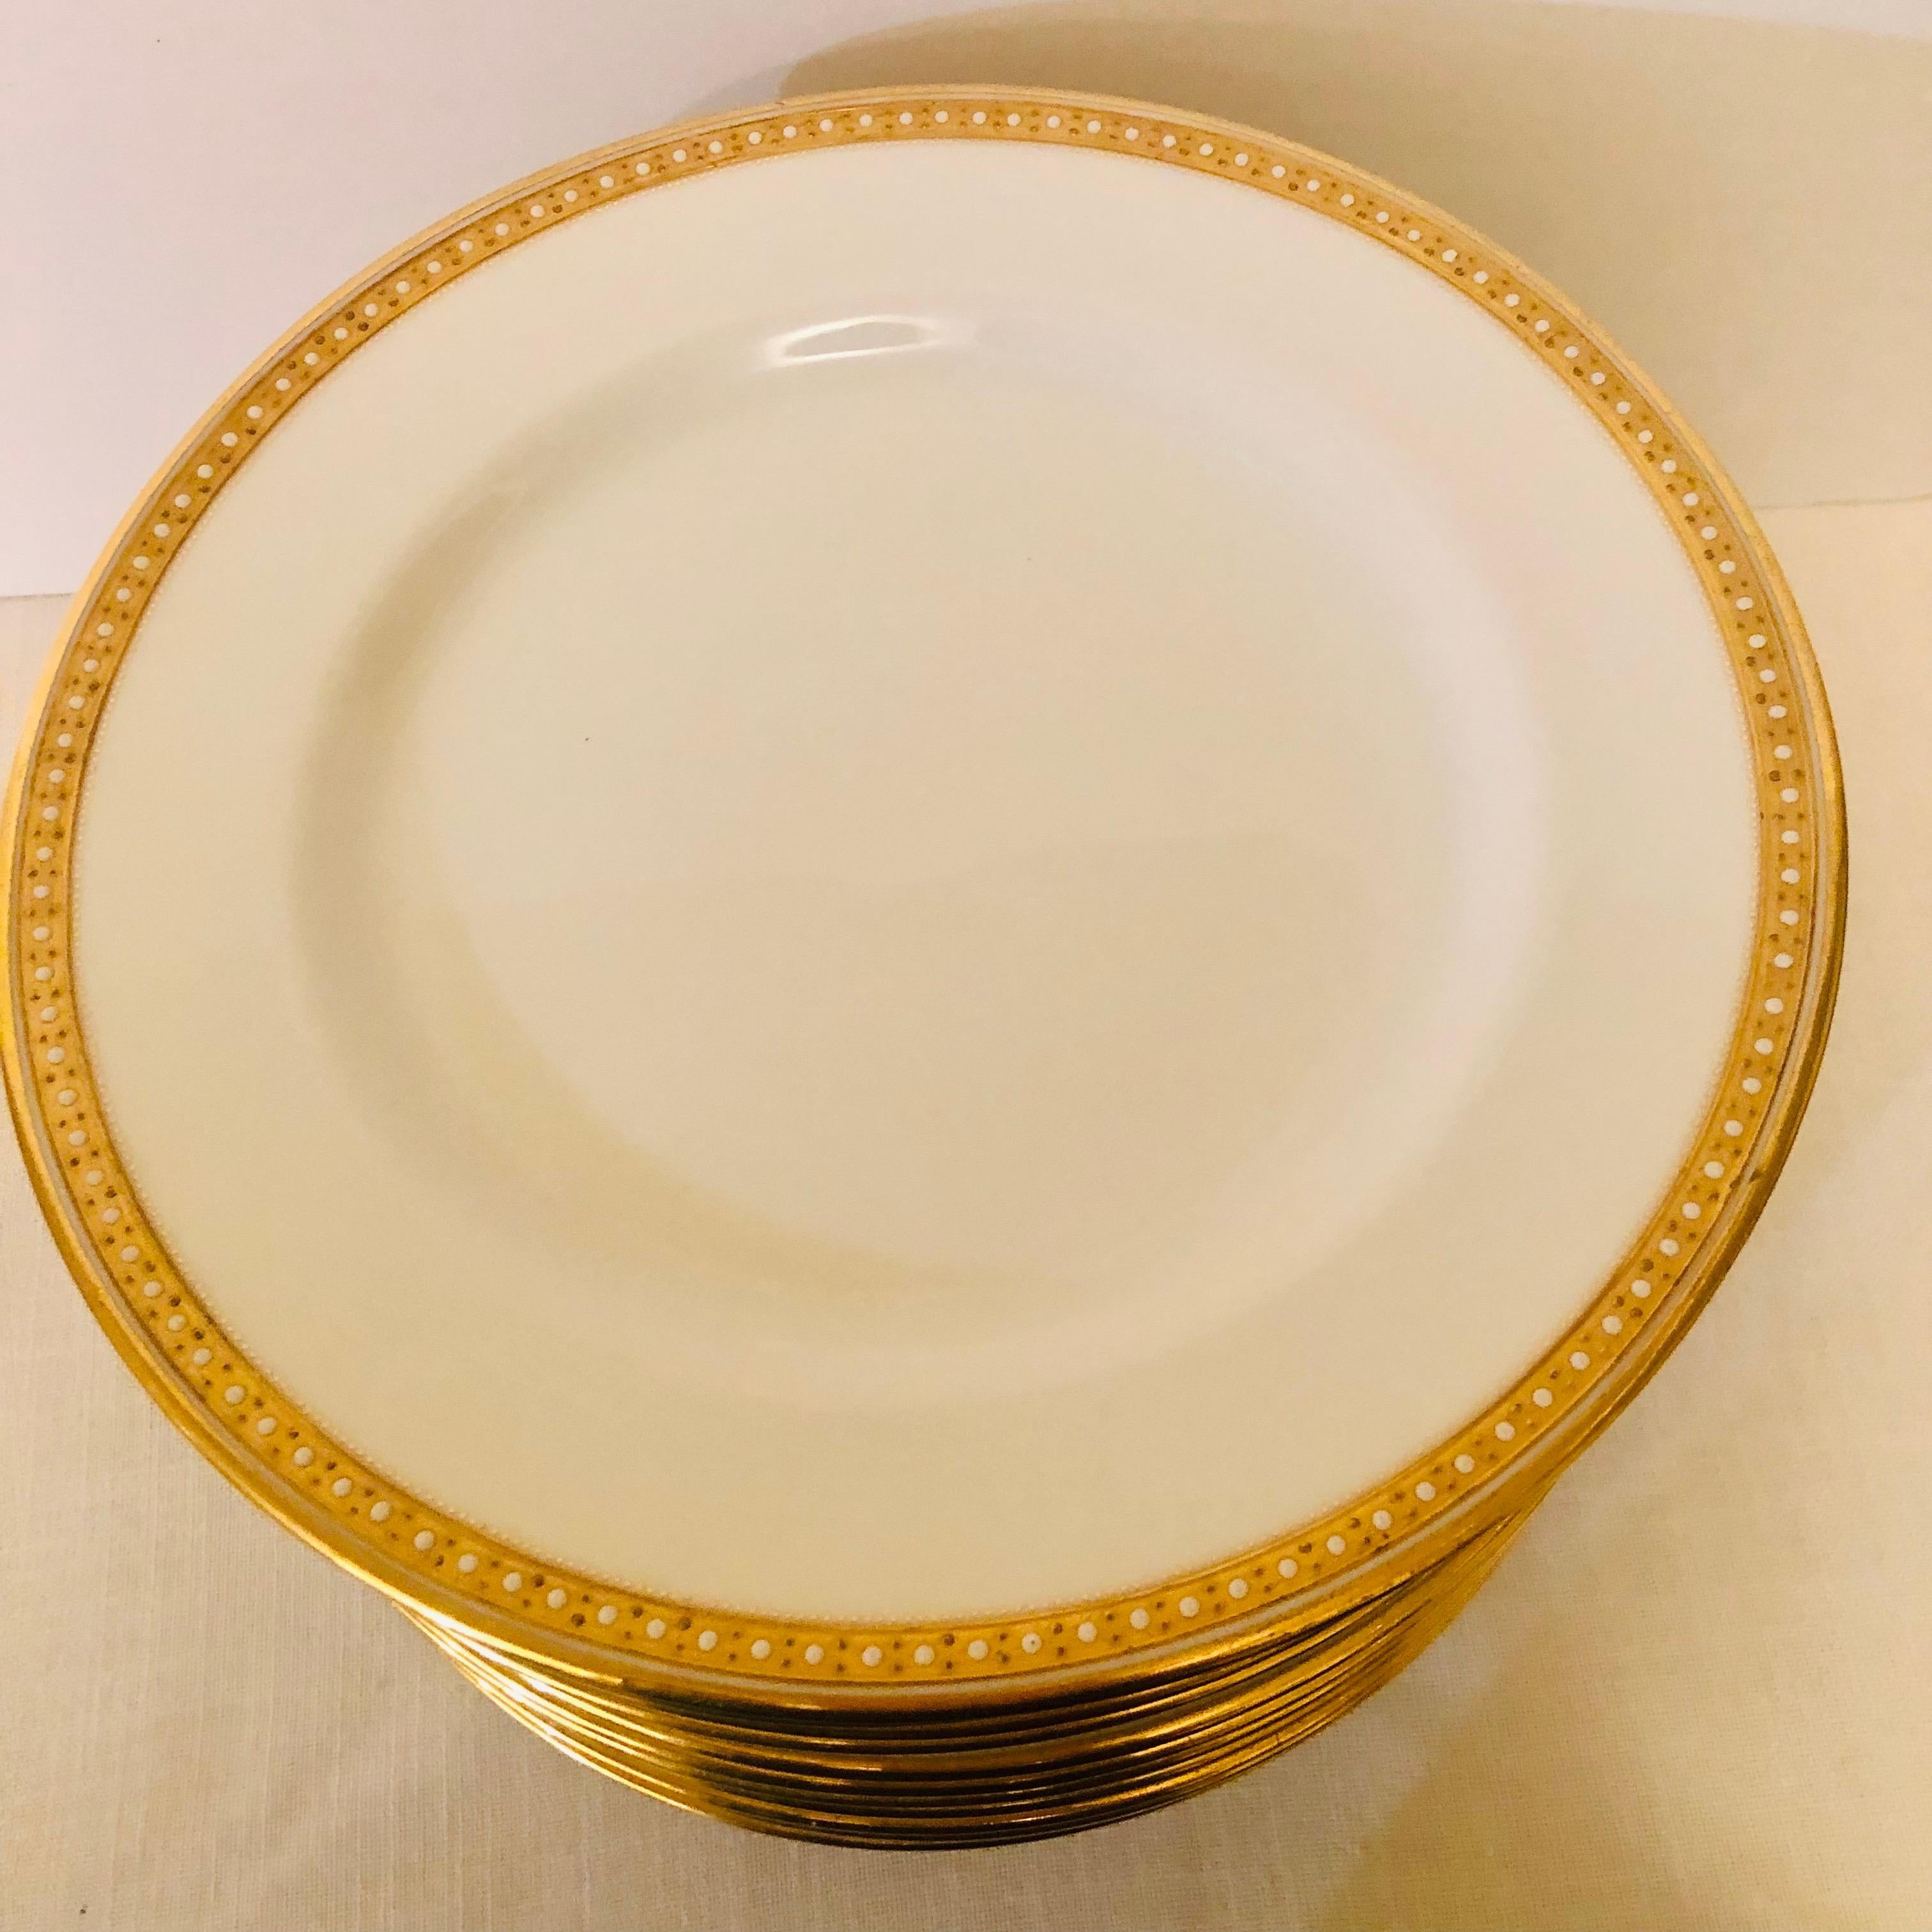 Set of 6 Copeland Spode Dinner Plates With Gold Borders and White Jeweling 